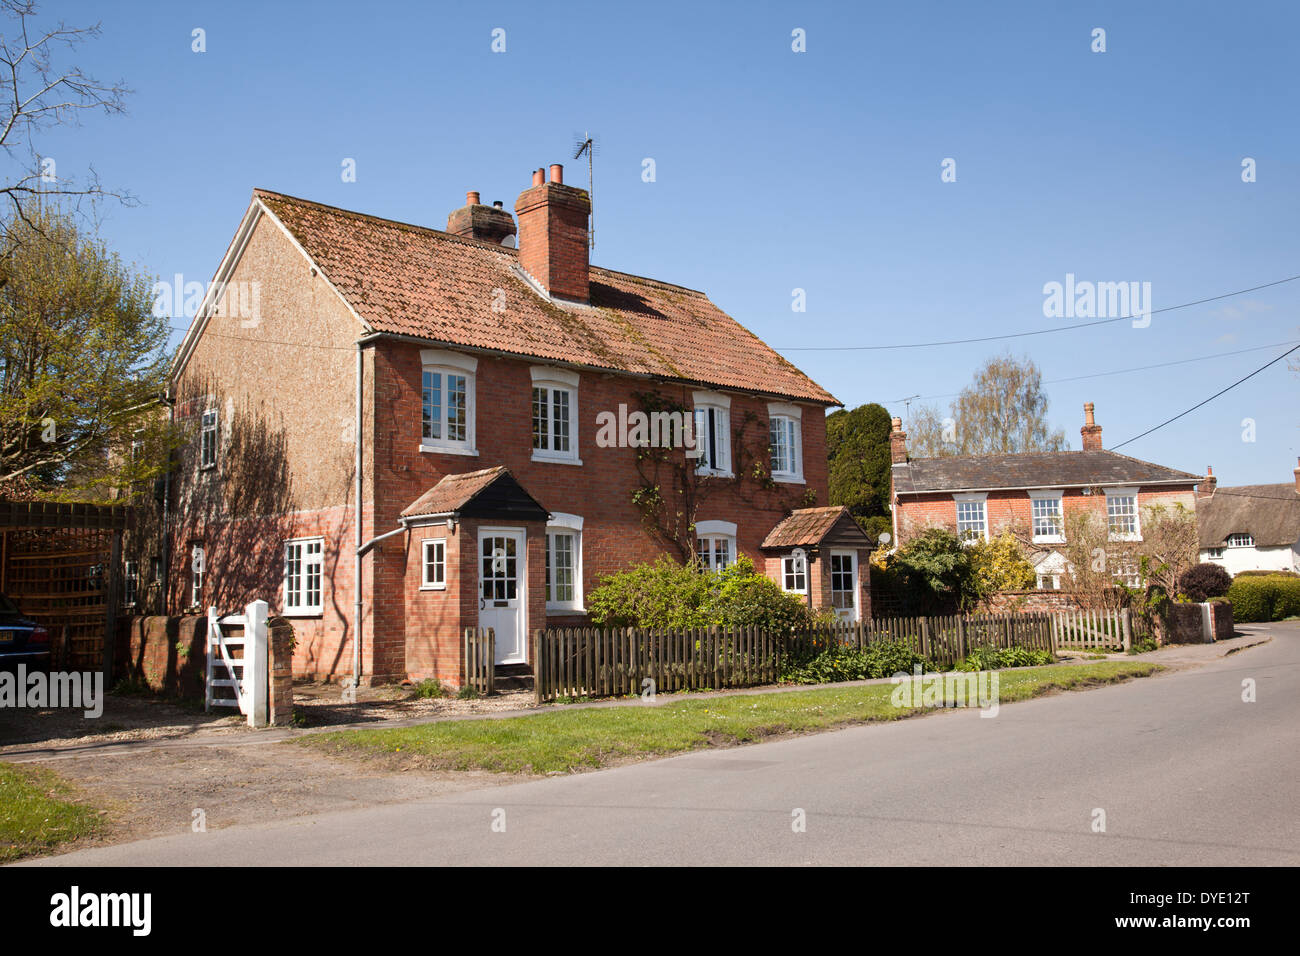 Traditional red brick houses in the village of Urchfont, Wiltshire, England, UK Stock Photo